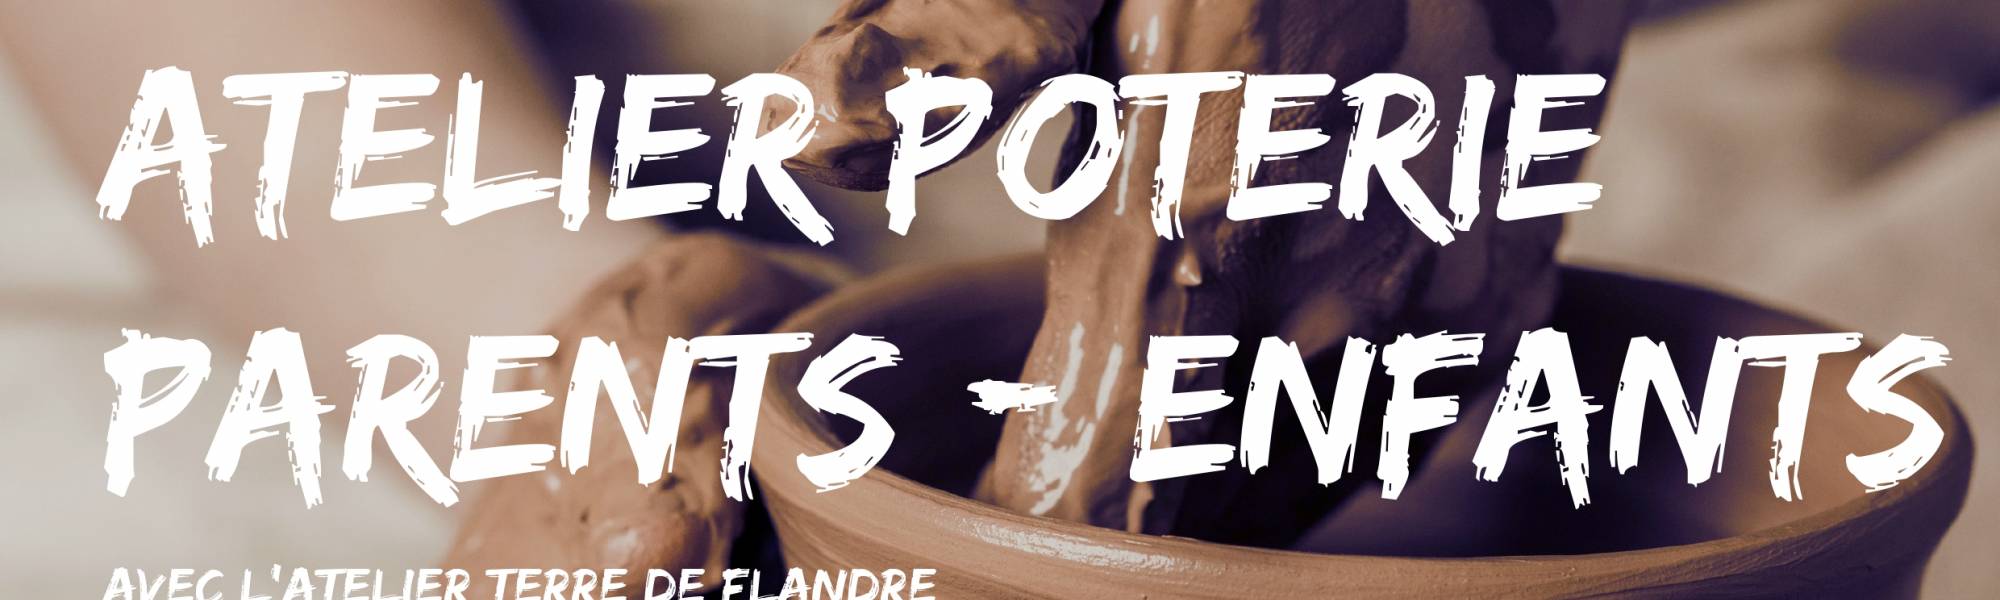 affiche atelier poterie_page-0001.jpg